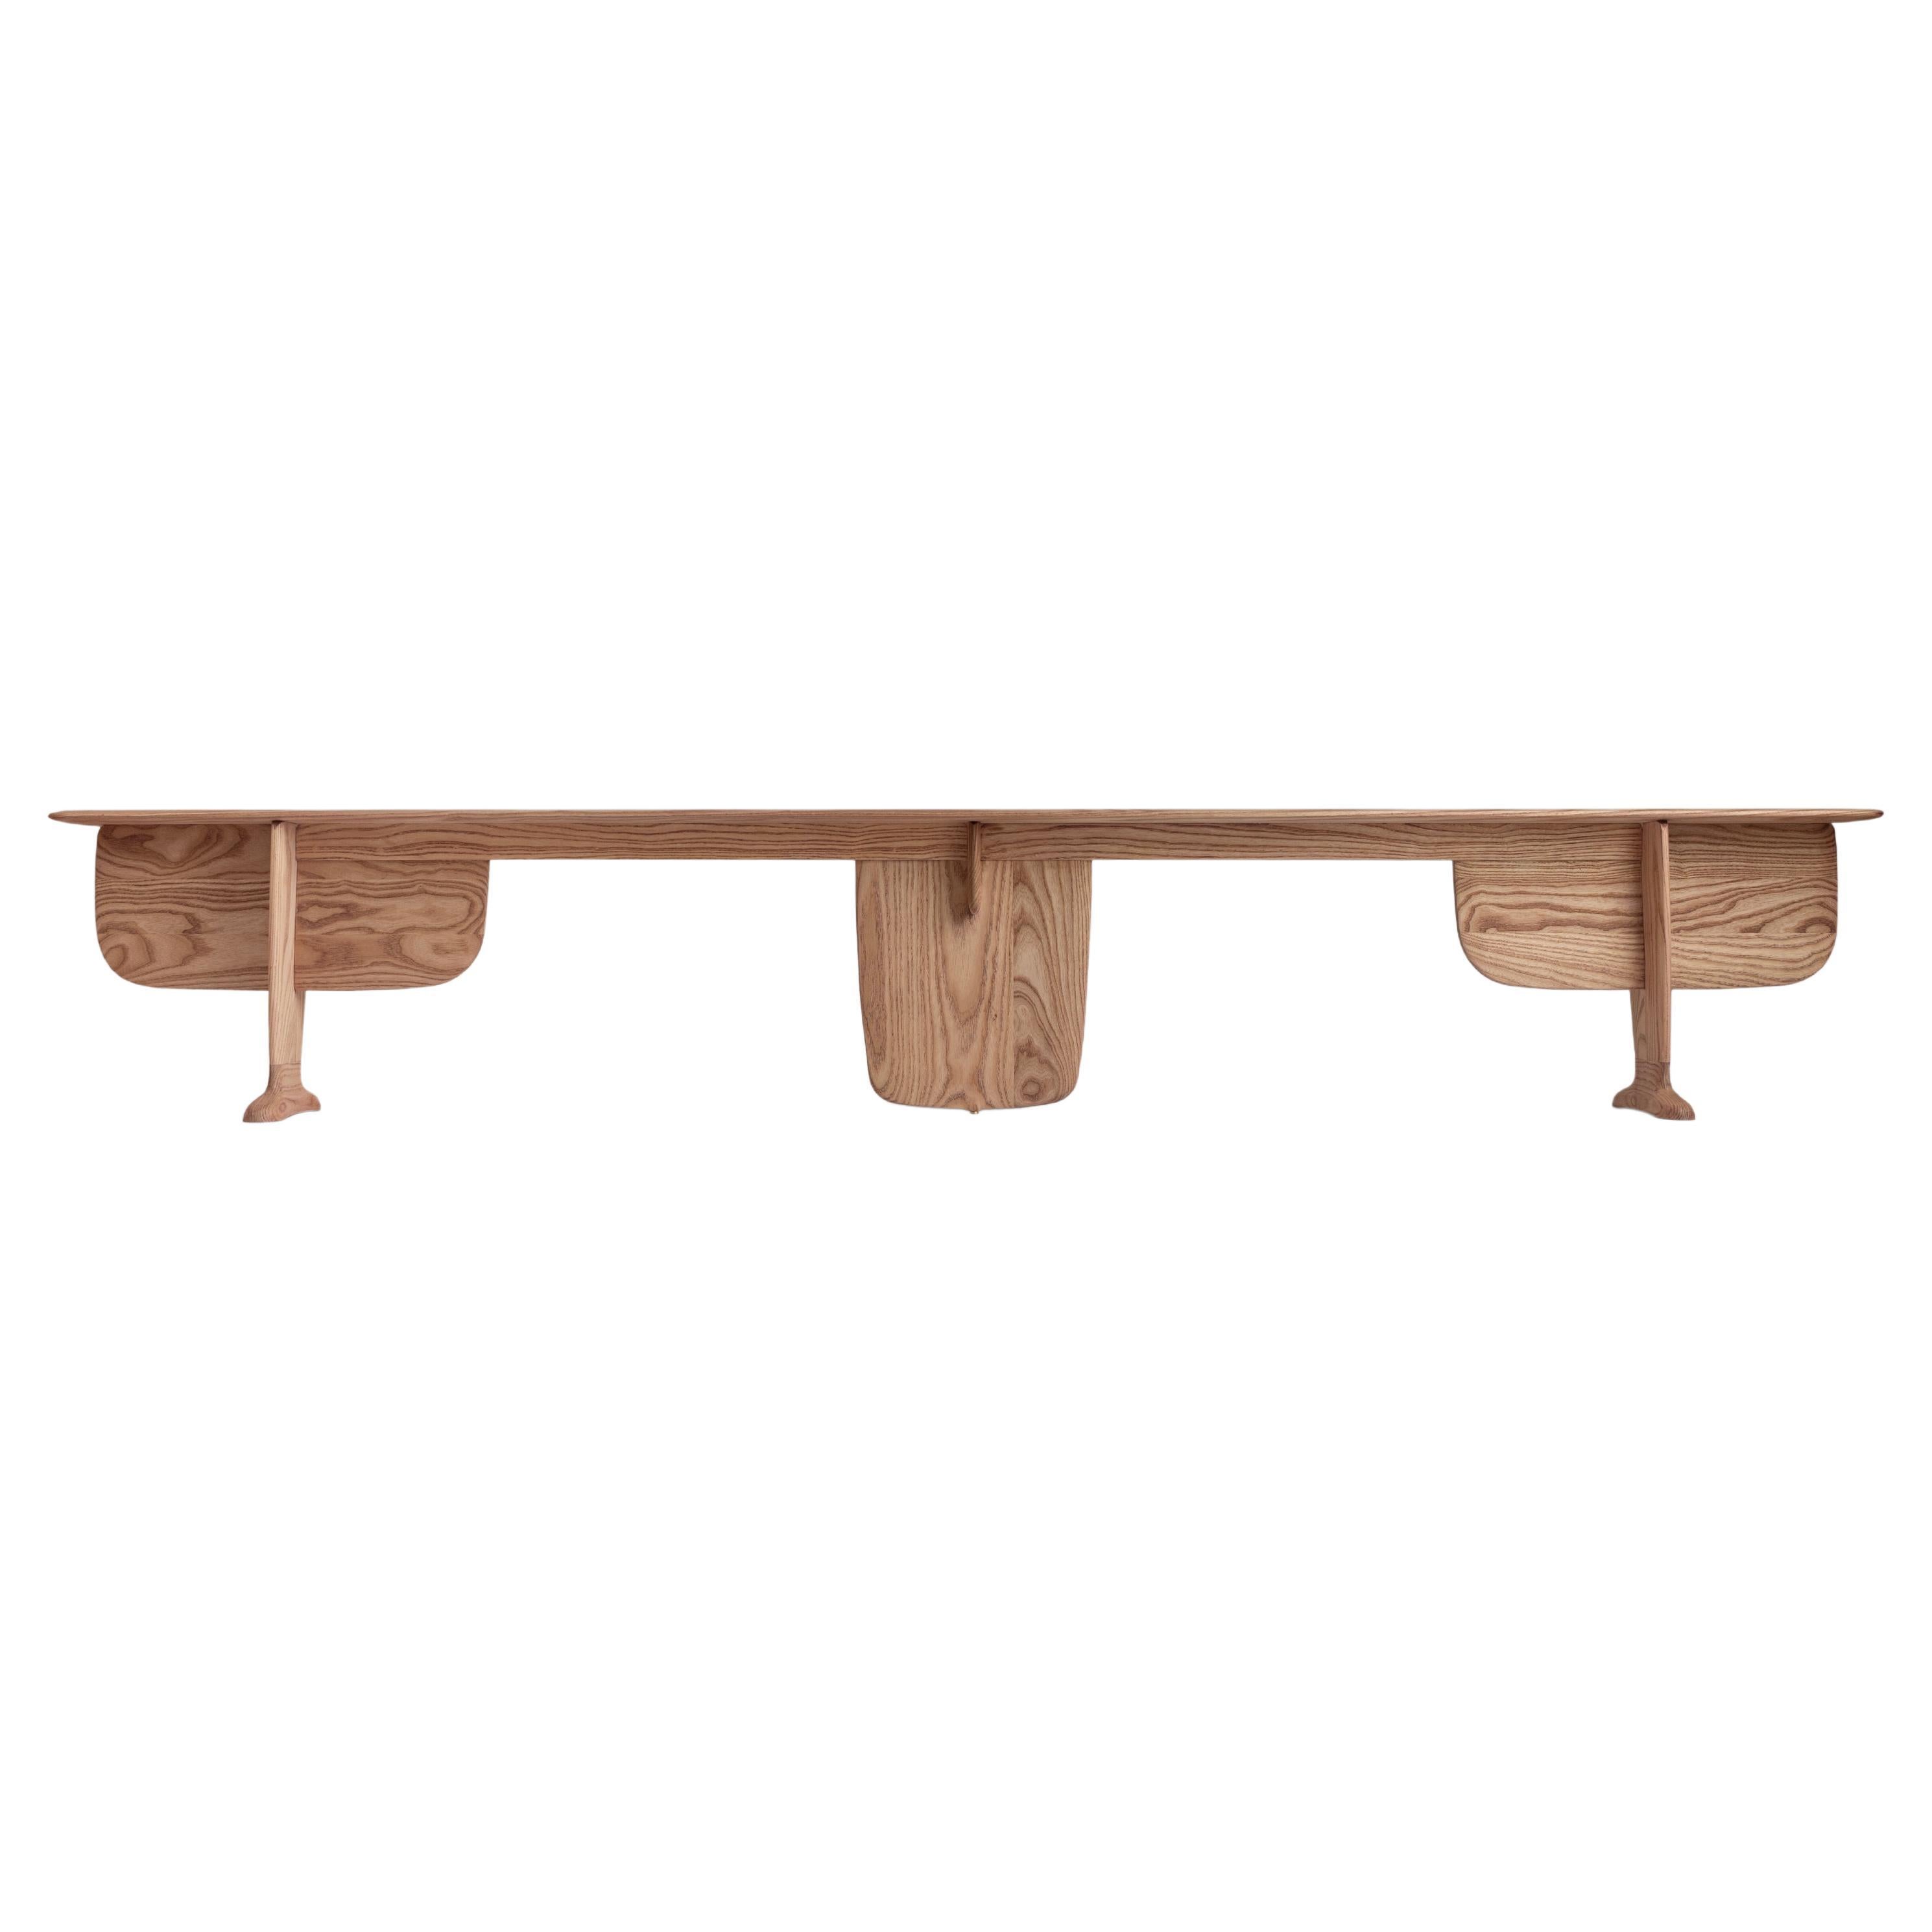 Mexican design benches, Contemporary, ash wood " A Little rest" by Carsten L.